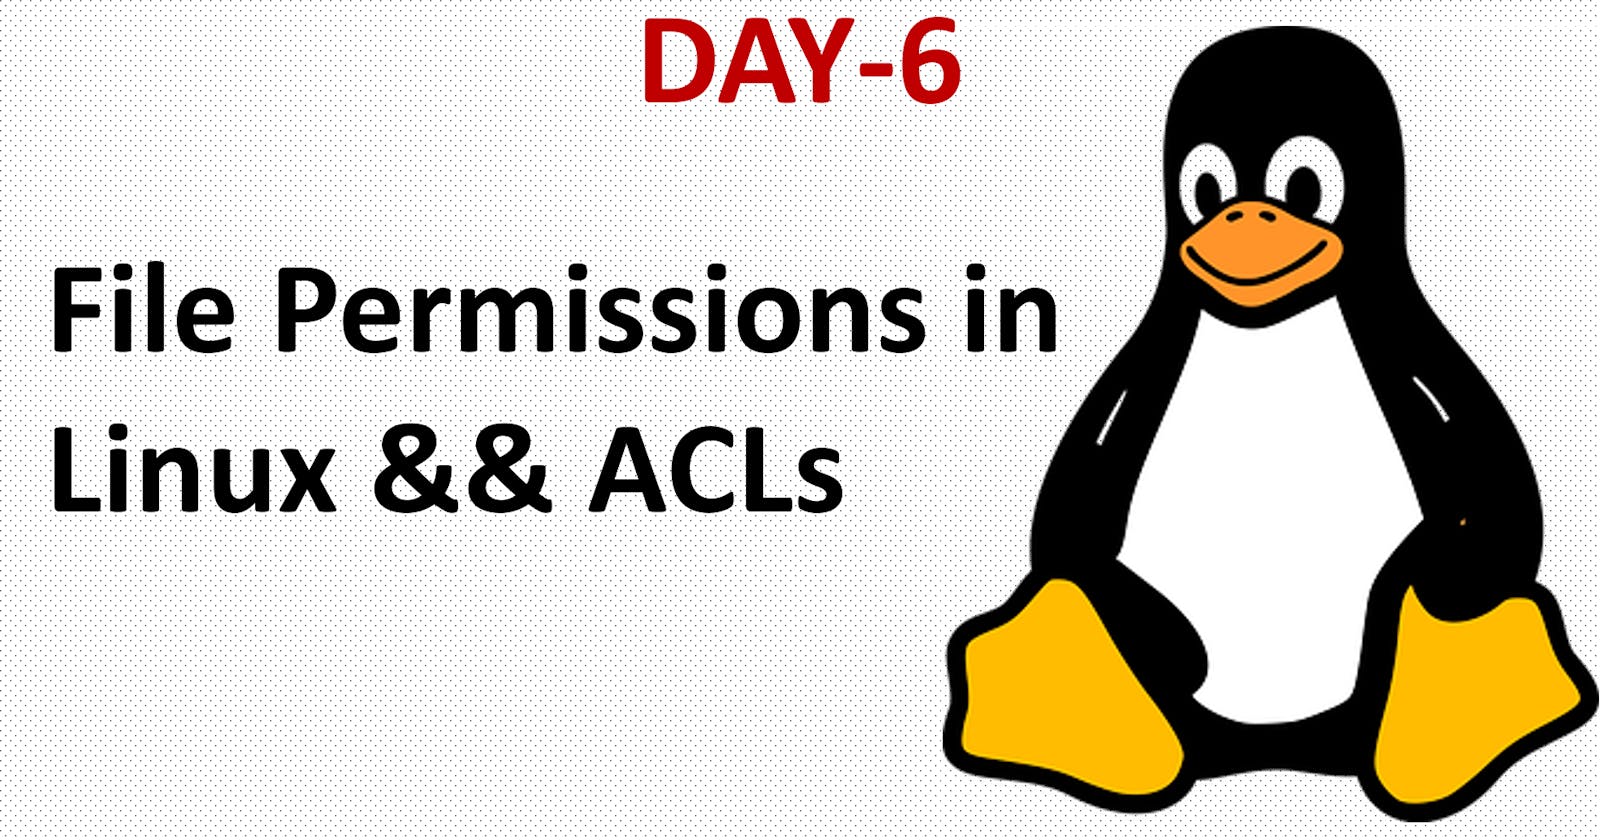 Day 6: File Permissions and Access Control List (ACL)